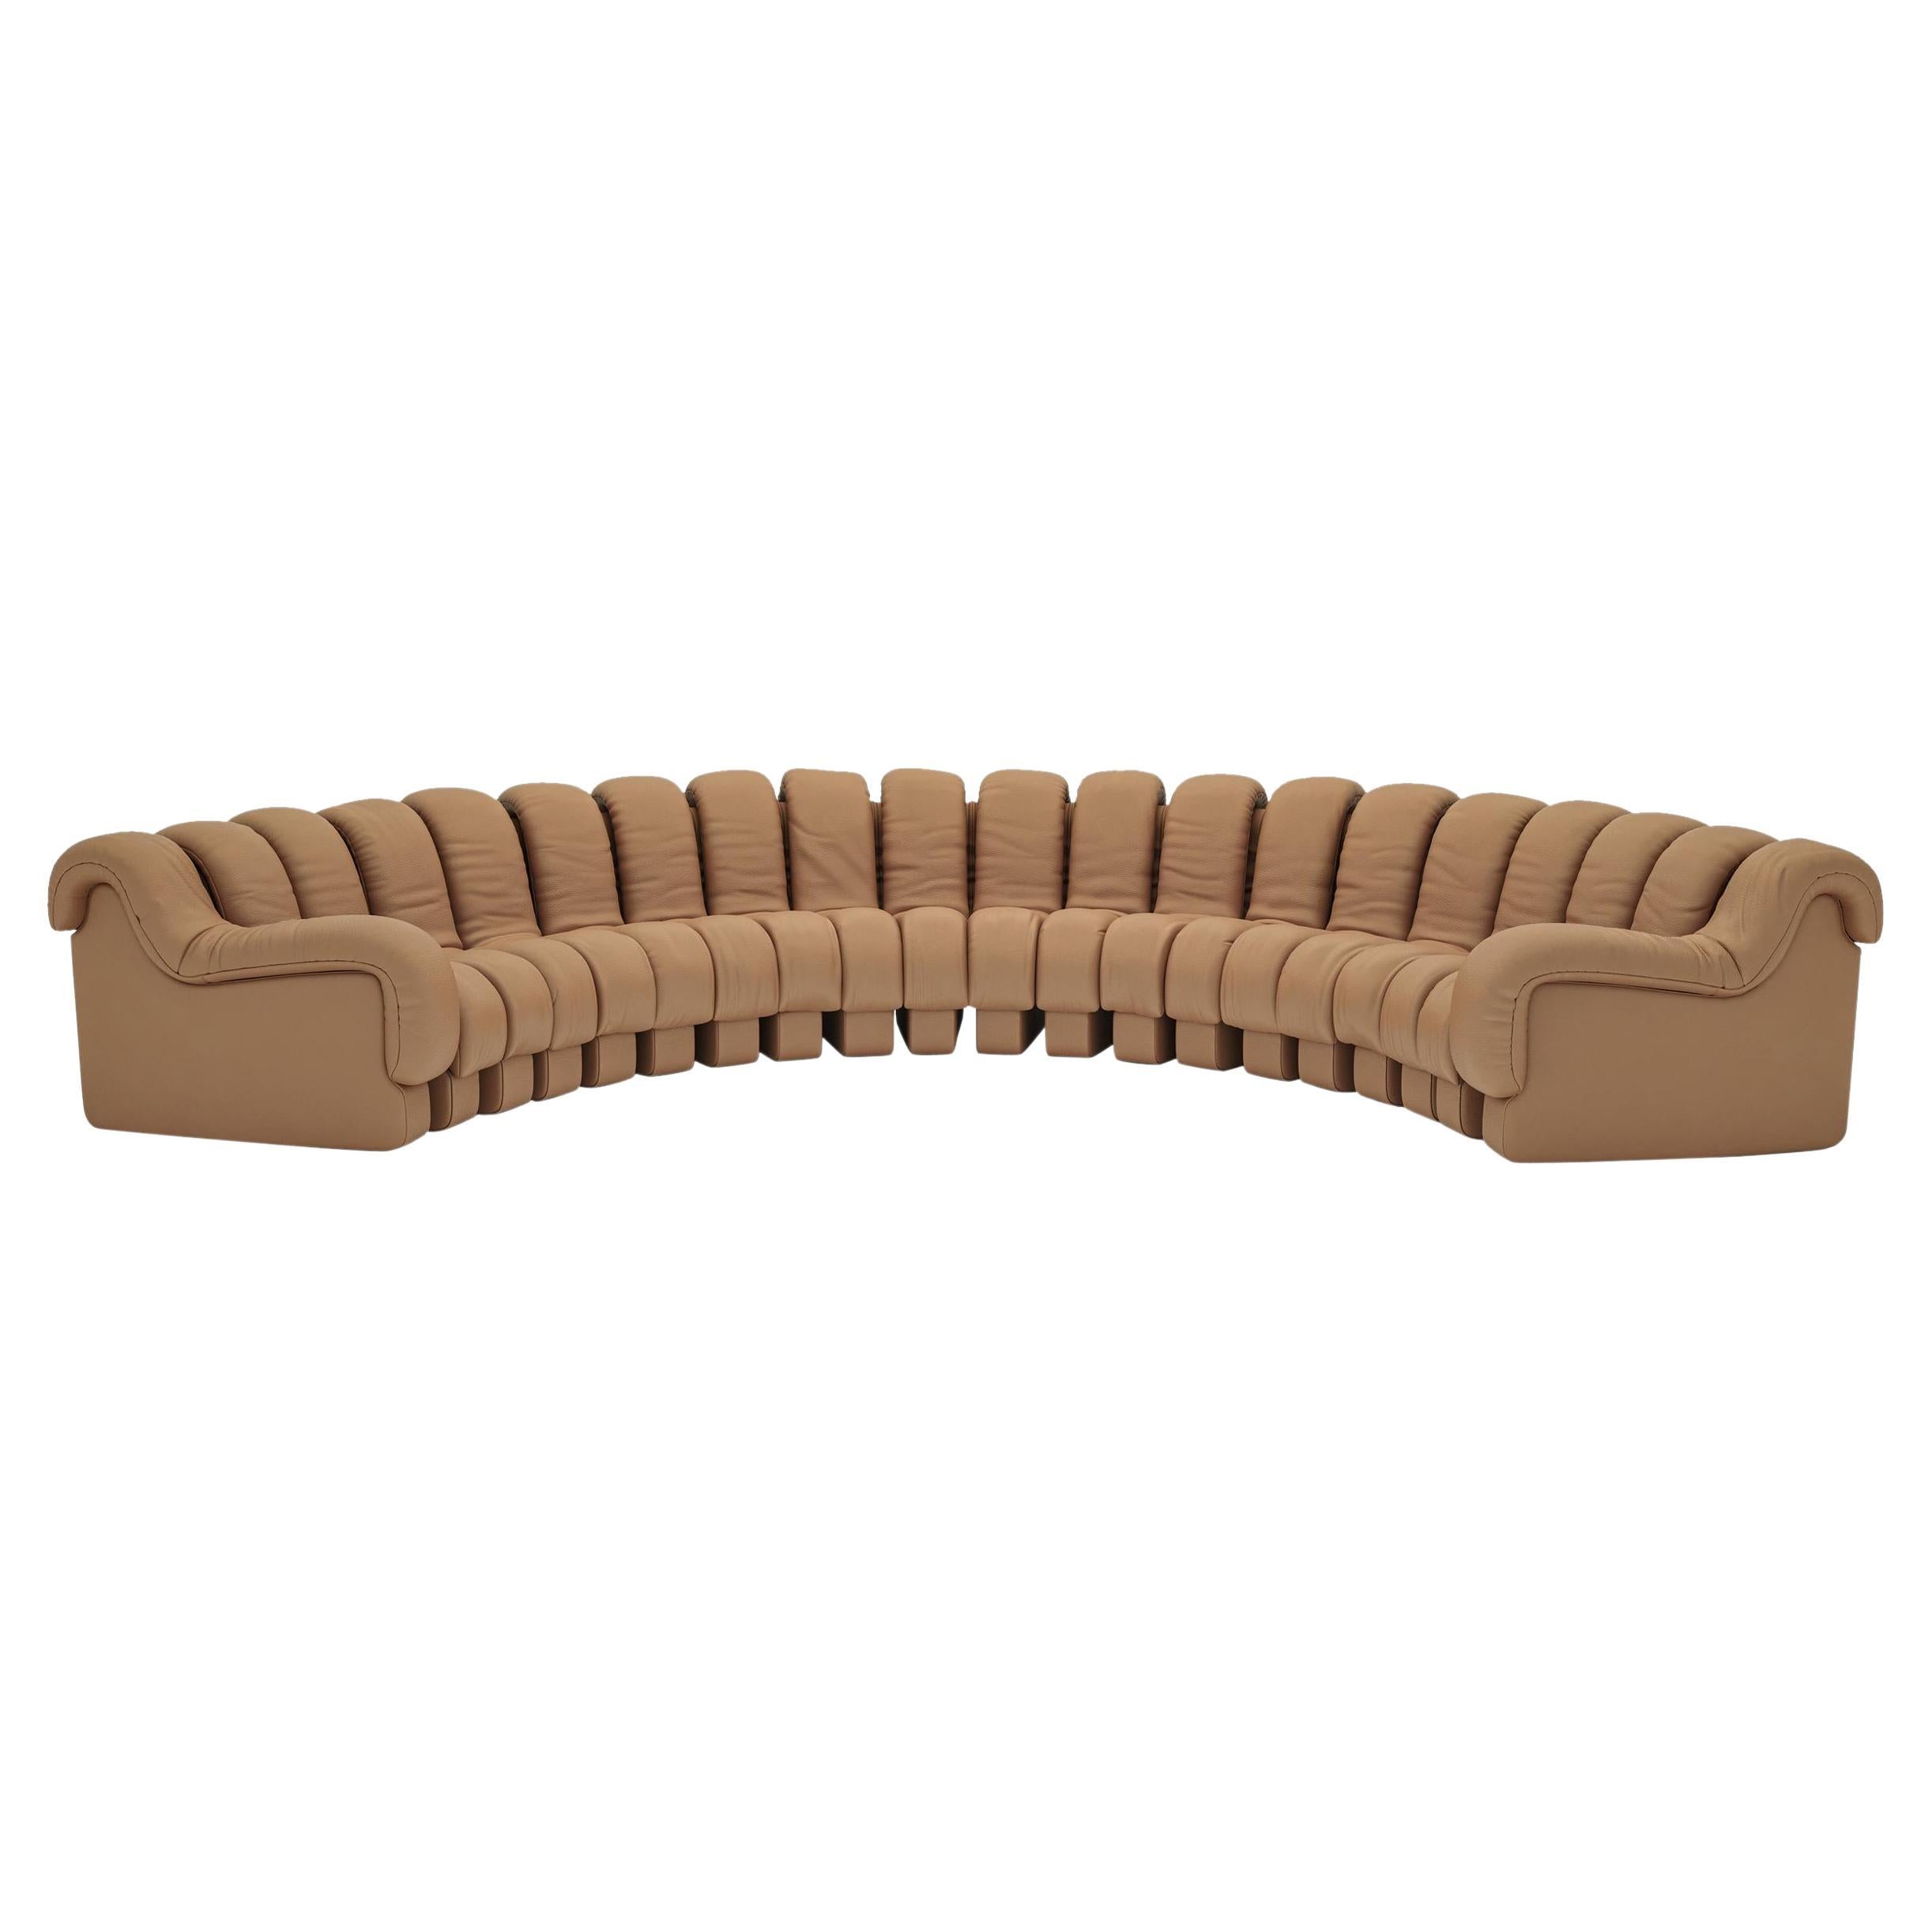 De Sede DS-600 “Non-stop” Modular Sofa in Cuoio Leather and Adjustable  Elements For Sale at 1stDibs | de sede sofa, de sede snake sofa, snake sofa